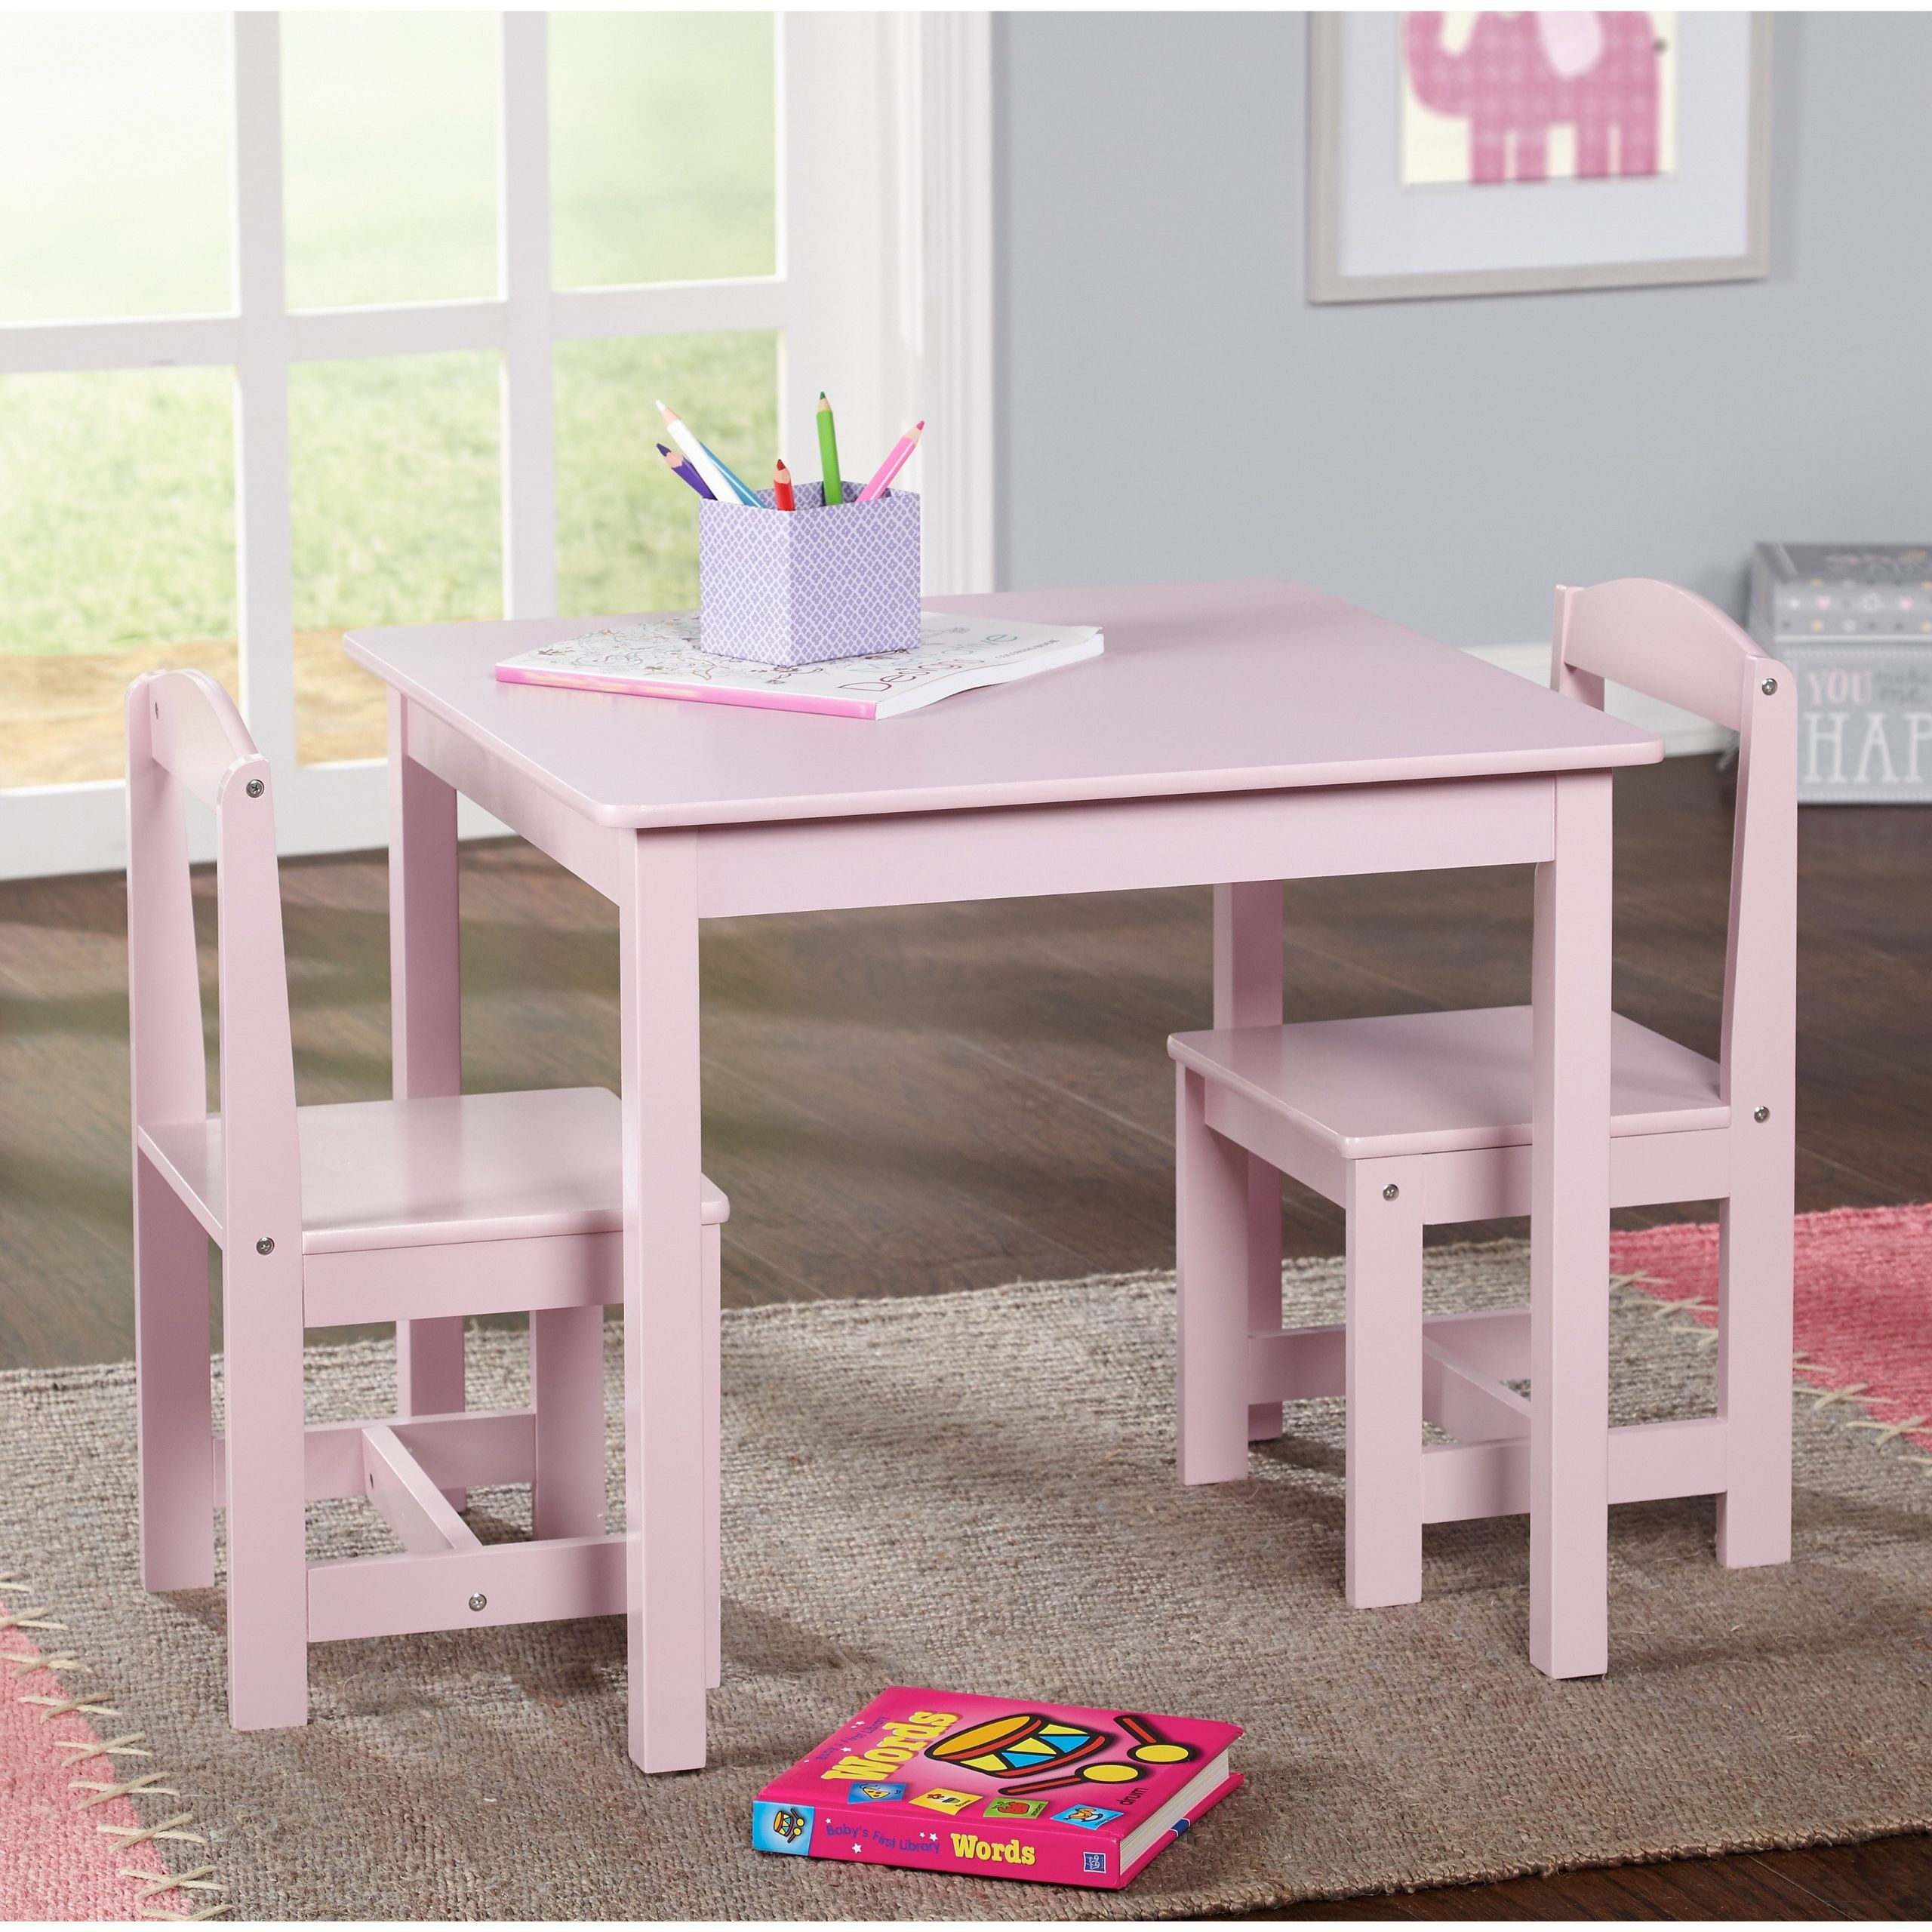 Kids Table And Chairs
 Kids Craft Table Modern And Chairs Children Activity